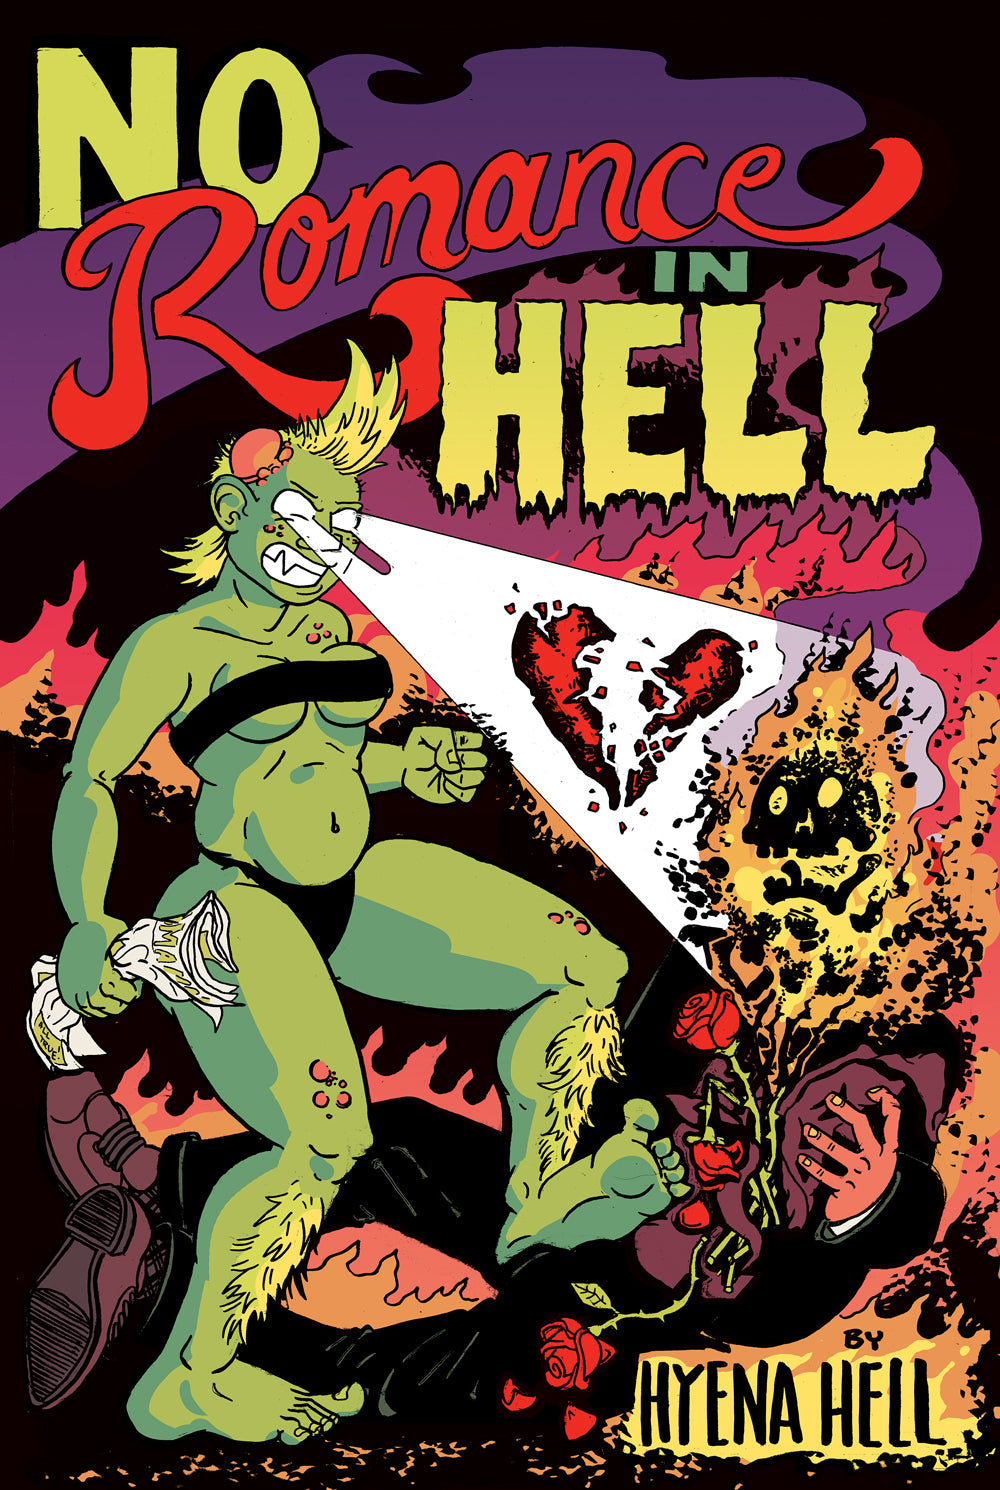 PDF Download: No Romance in Hell by Hyena Hell